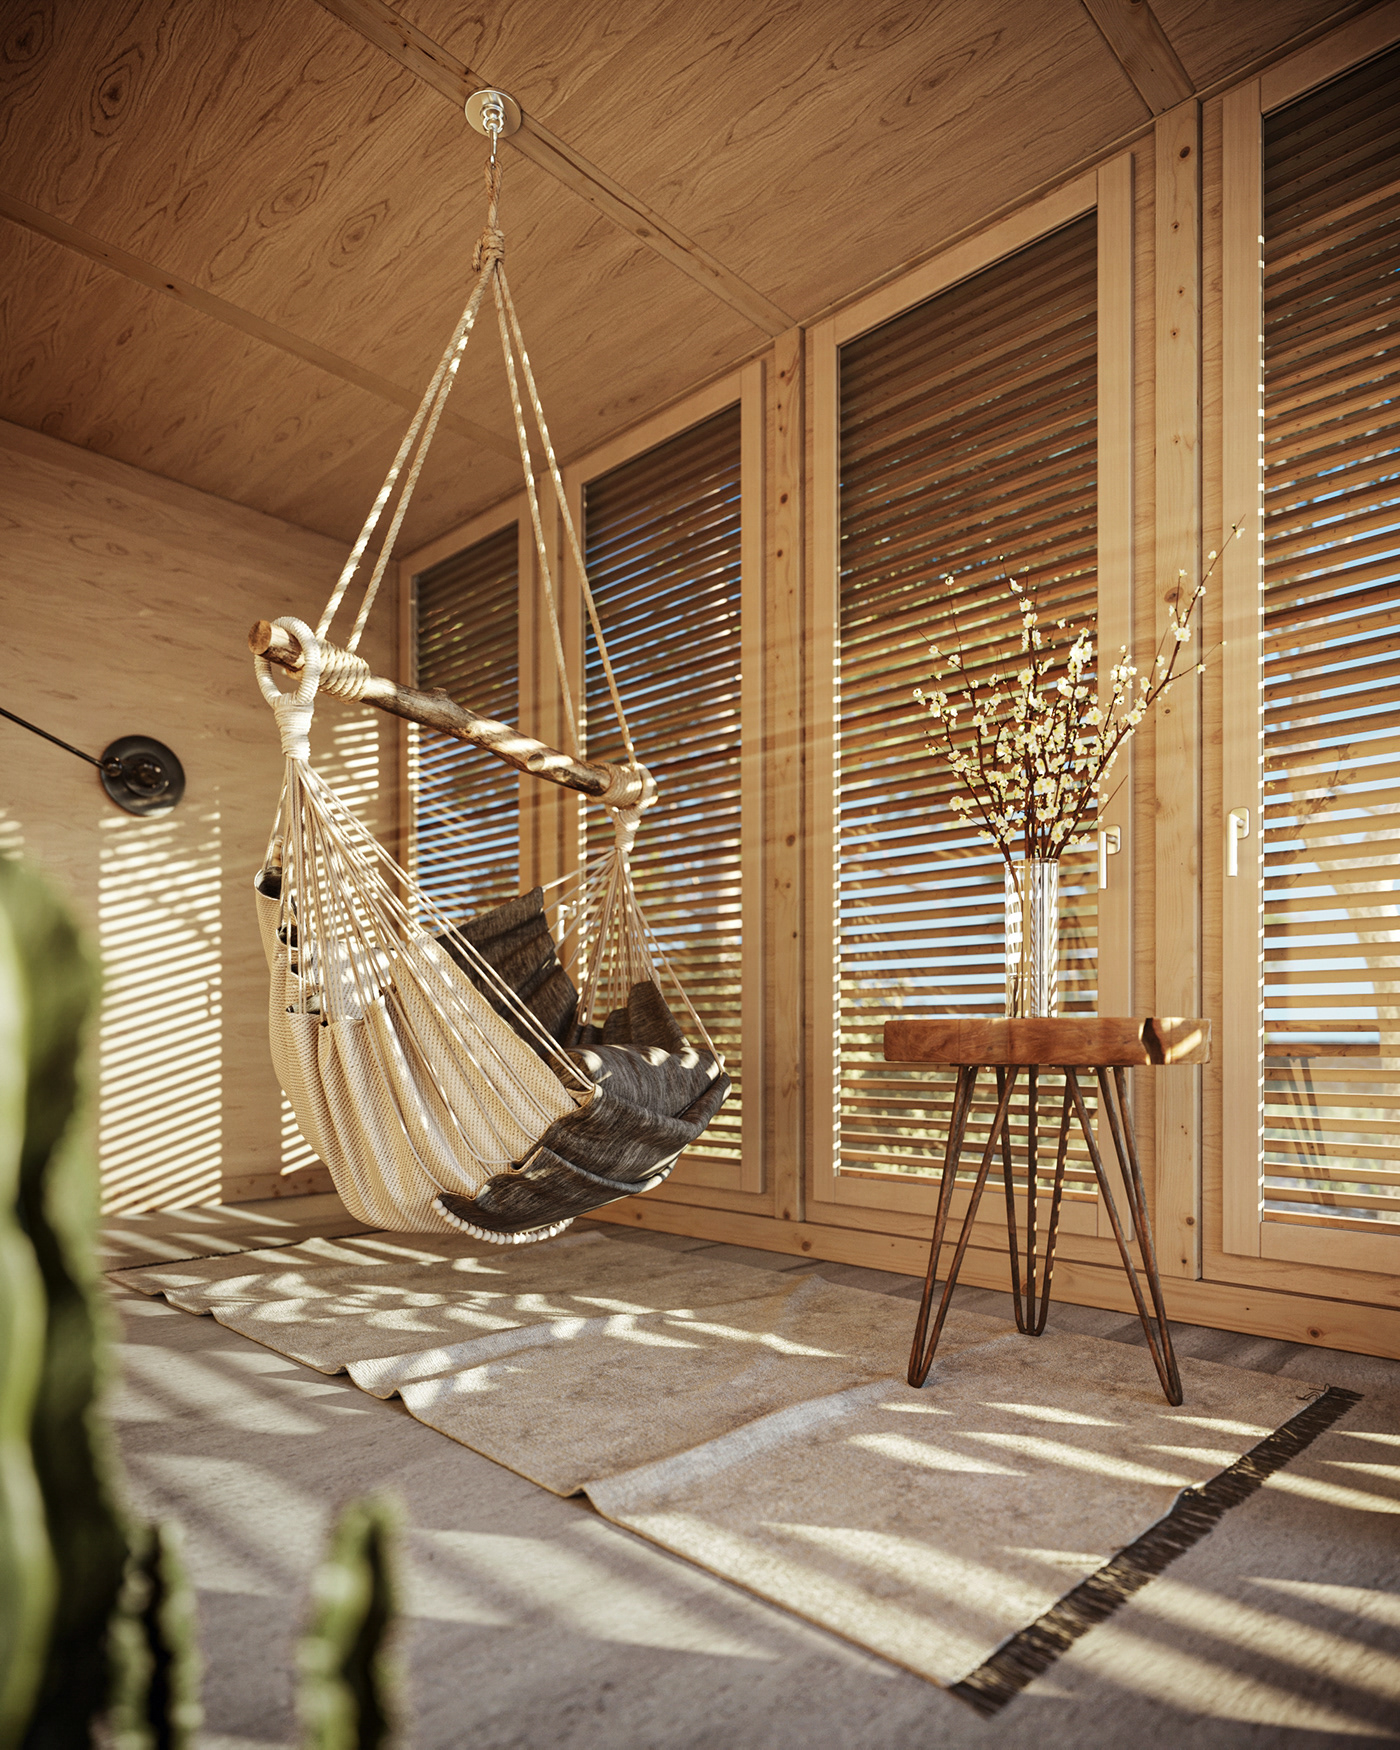 Hanging Chair Interior pavilion simplicity summer wood